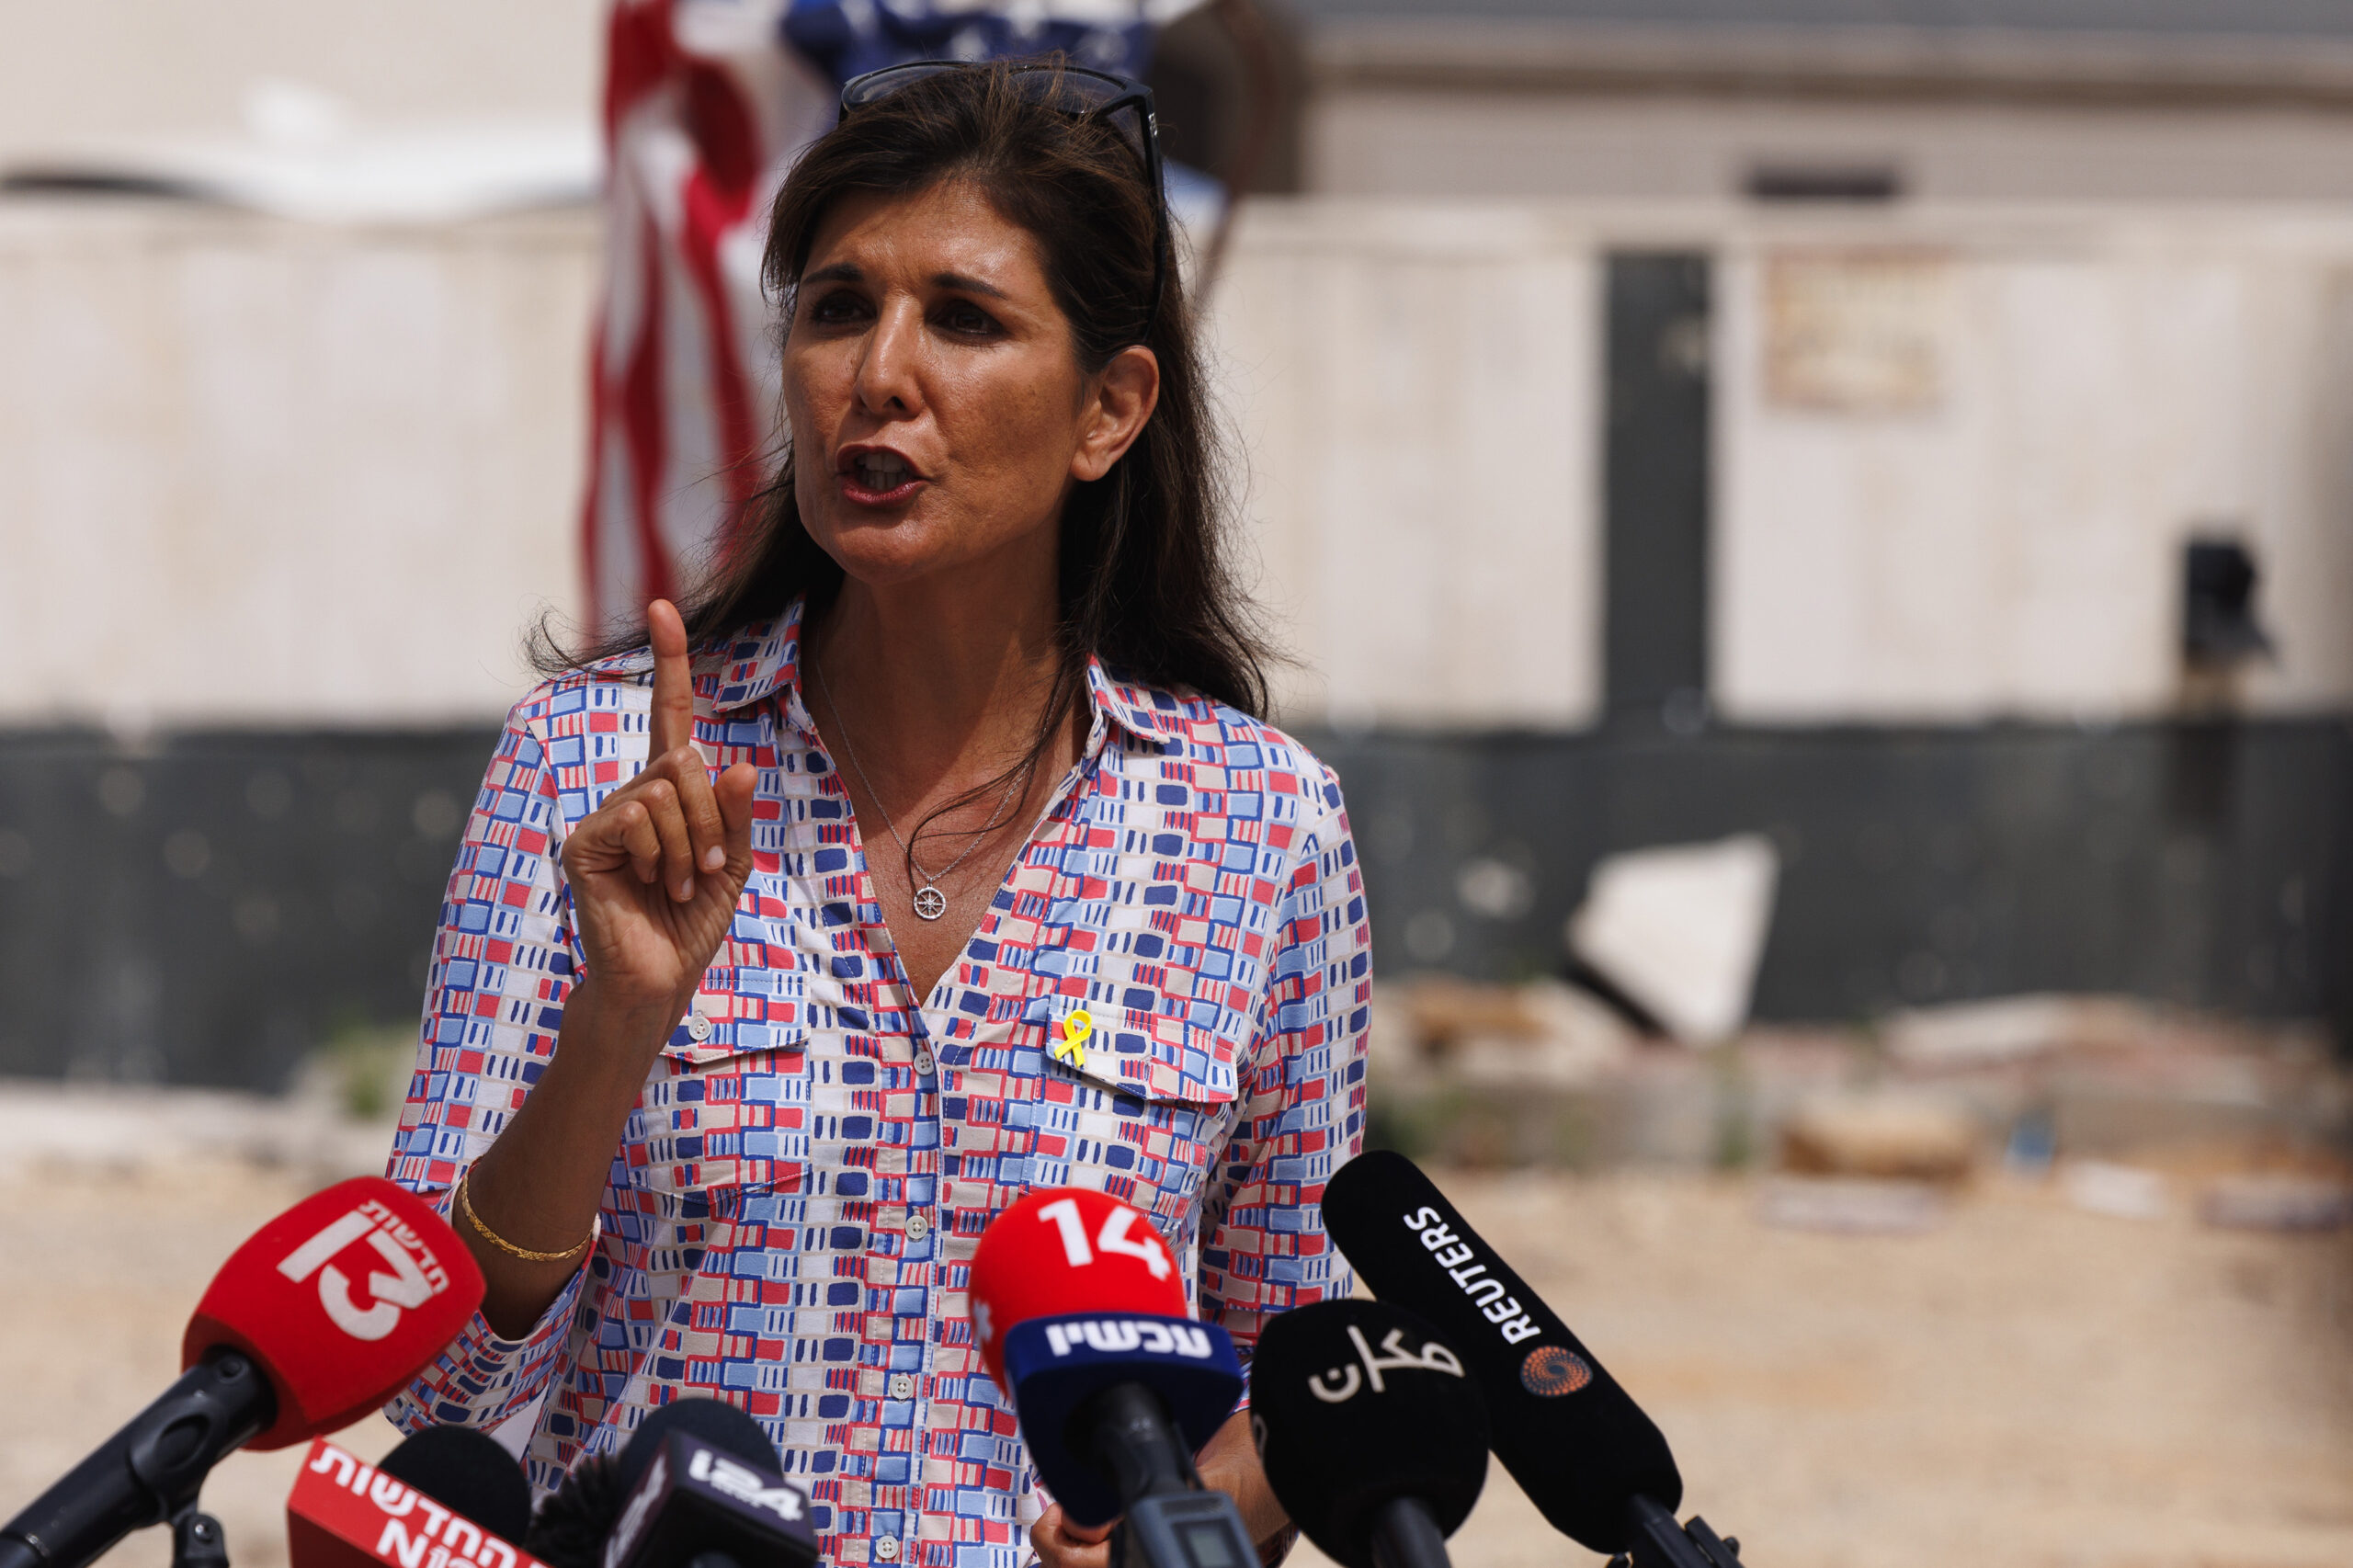 Nikki Haley Asserts Her Ability to Collaborate with Trump Post-Difficult Campaign: ‘It’s All About America